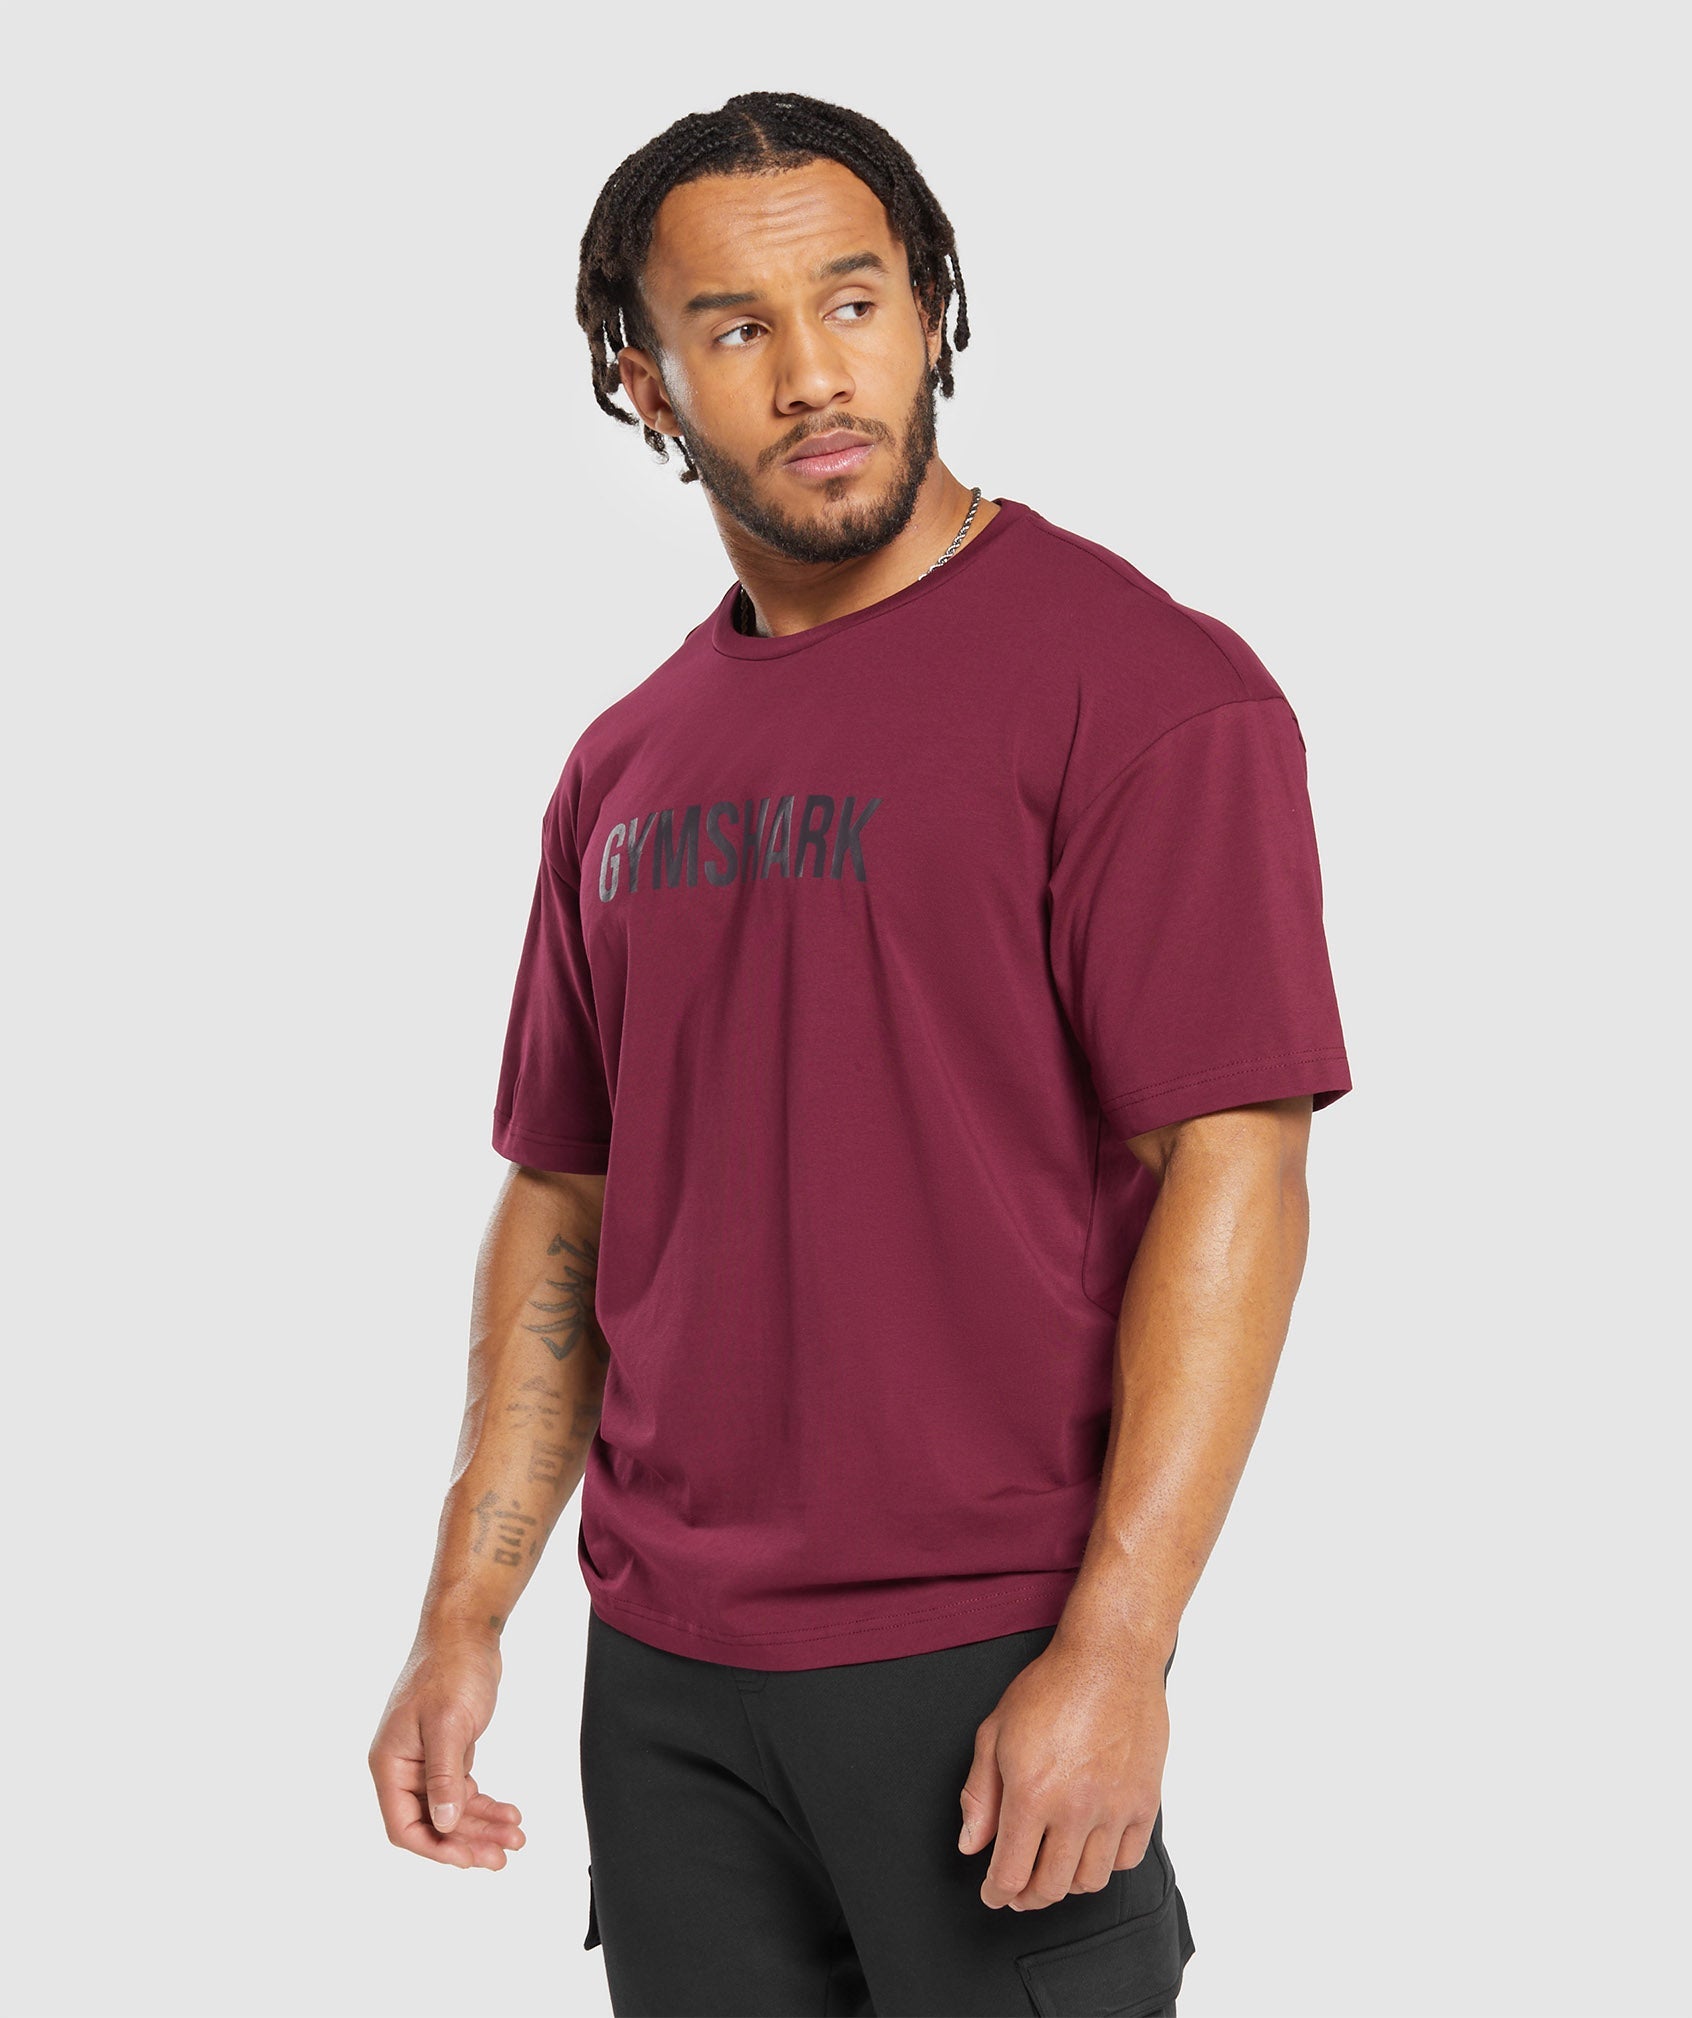 Apollo Oversized T-Shirt in Plum Pink - view 3